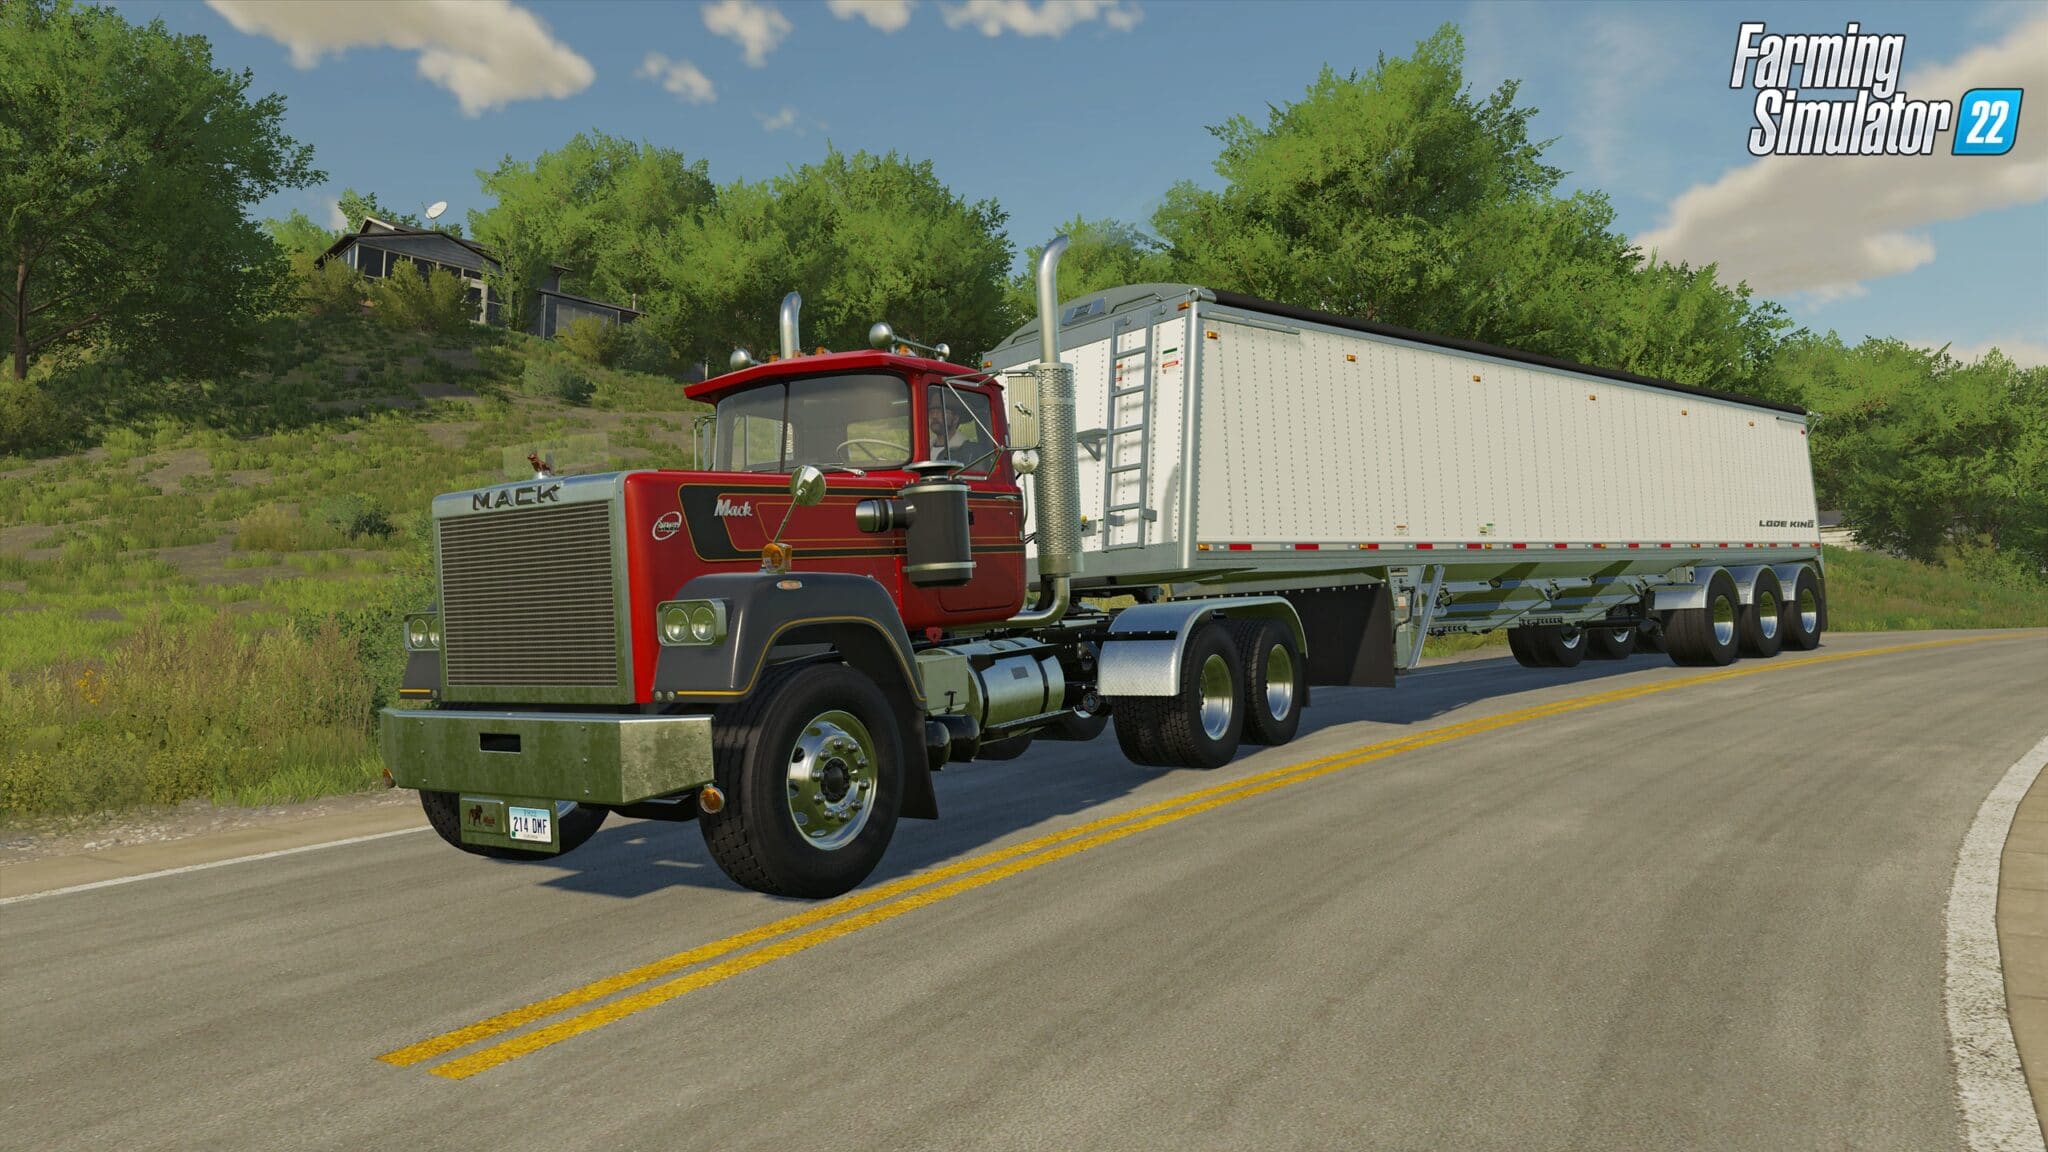 The Superliner from Mack Trucks is a perfect visual fit for the US map